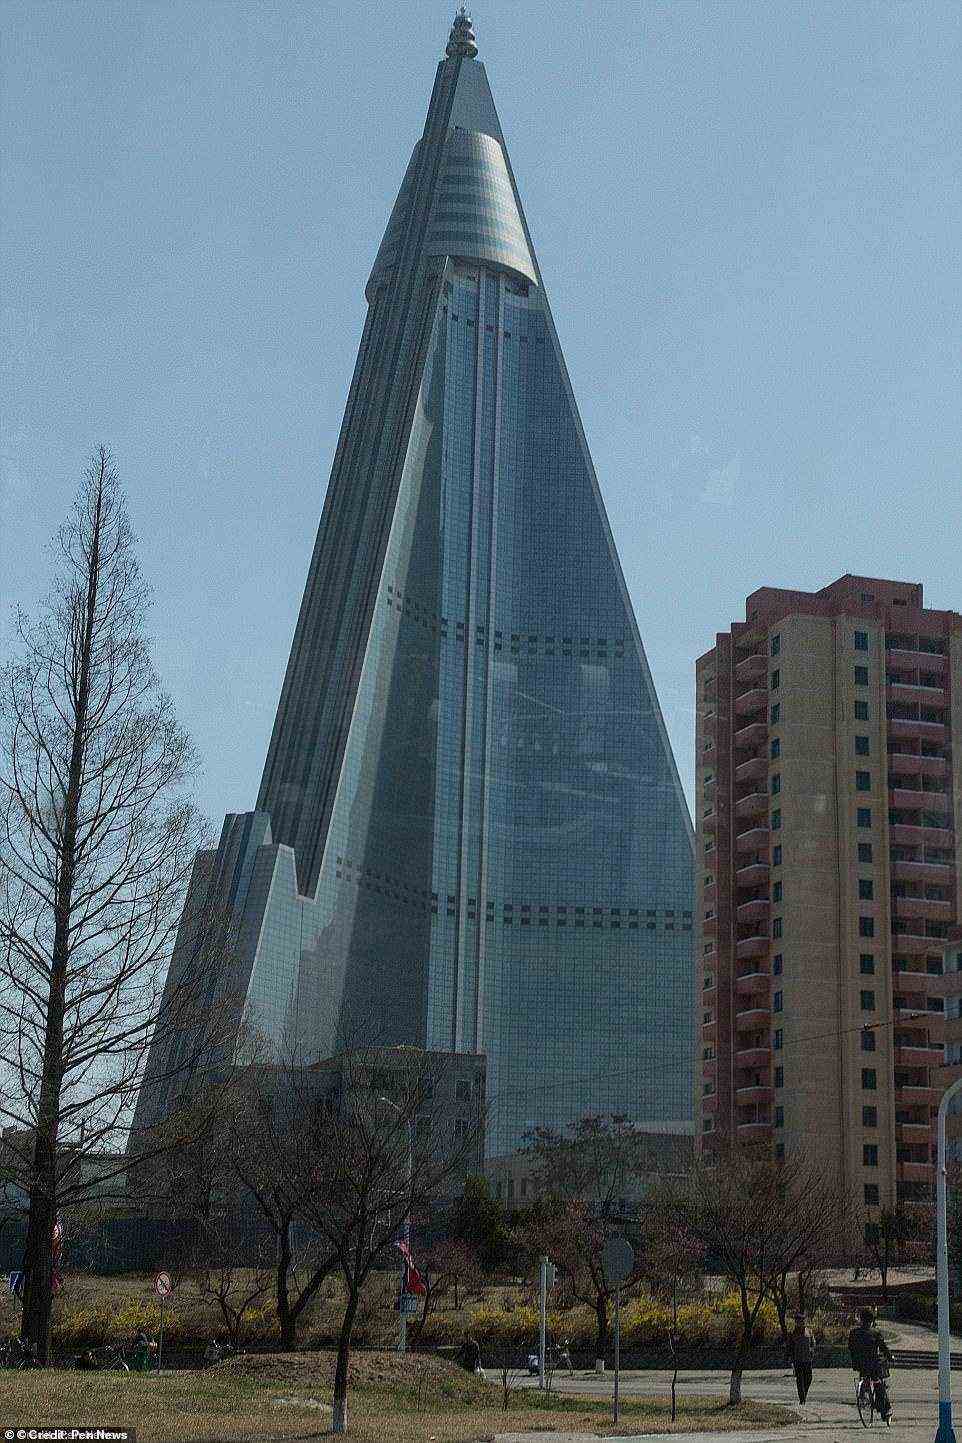 To finally finish the Ryugyong Hotel it would reportedly cost $2billion, which is 5% of North Korea's GDP (around $40 billion)